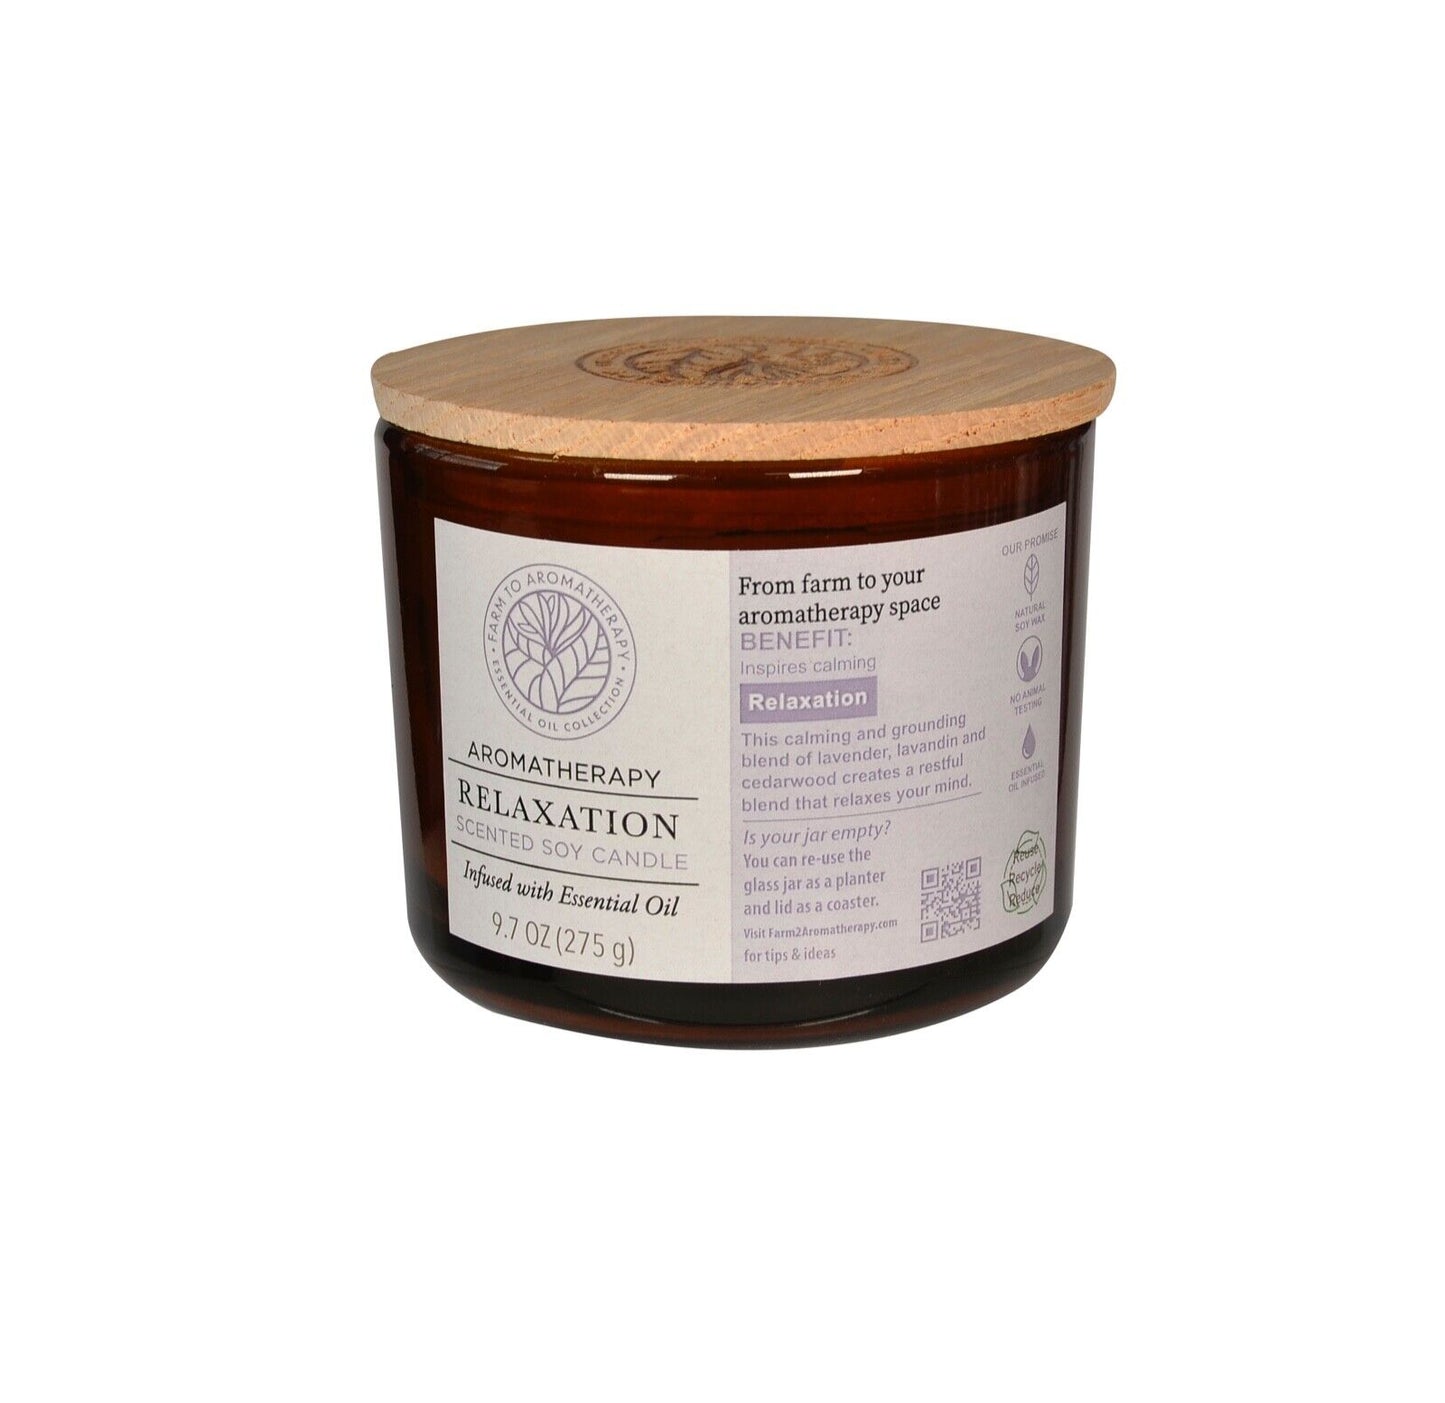 Aromatherapy Relaxation Scented Soy Candle Infused with Essential Oils (275g)